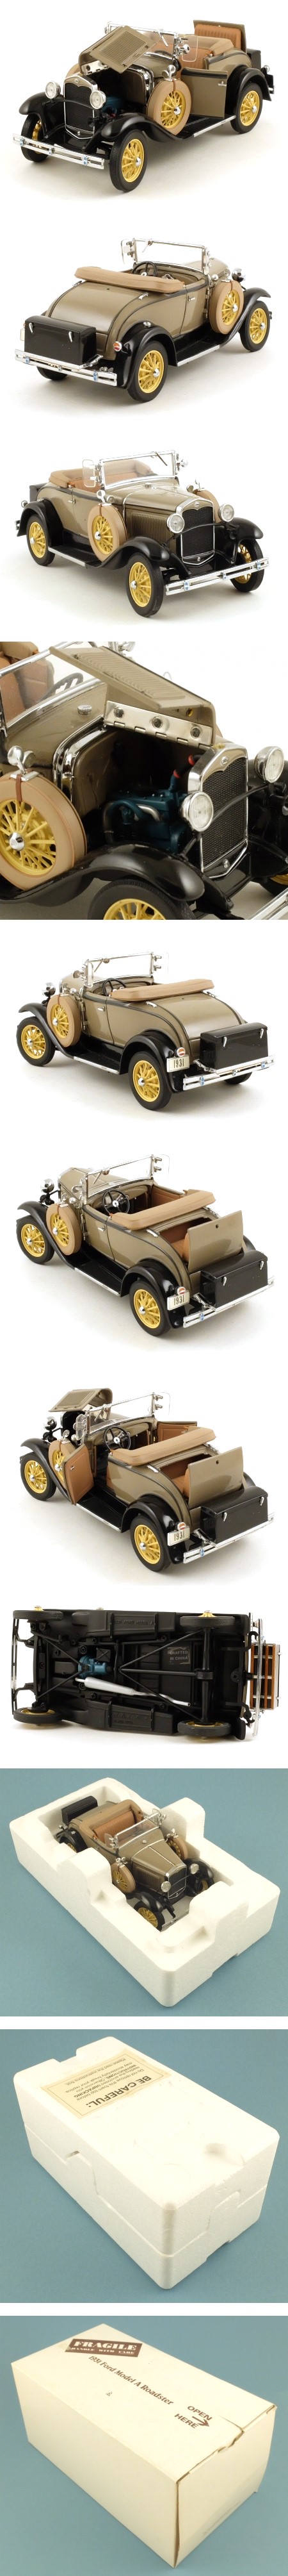 195-023 1931 Ford Model A Roadster